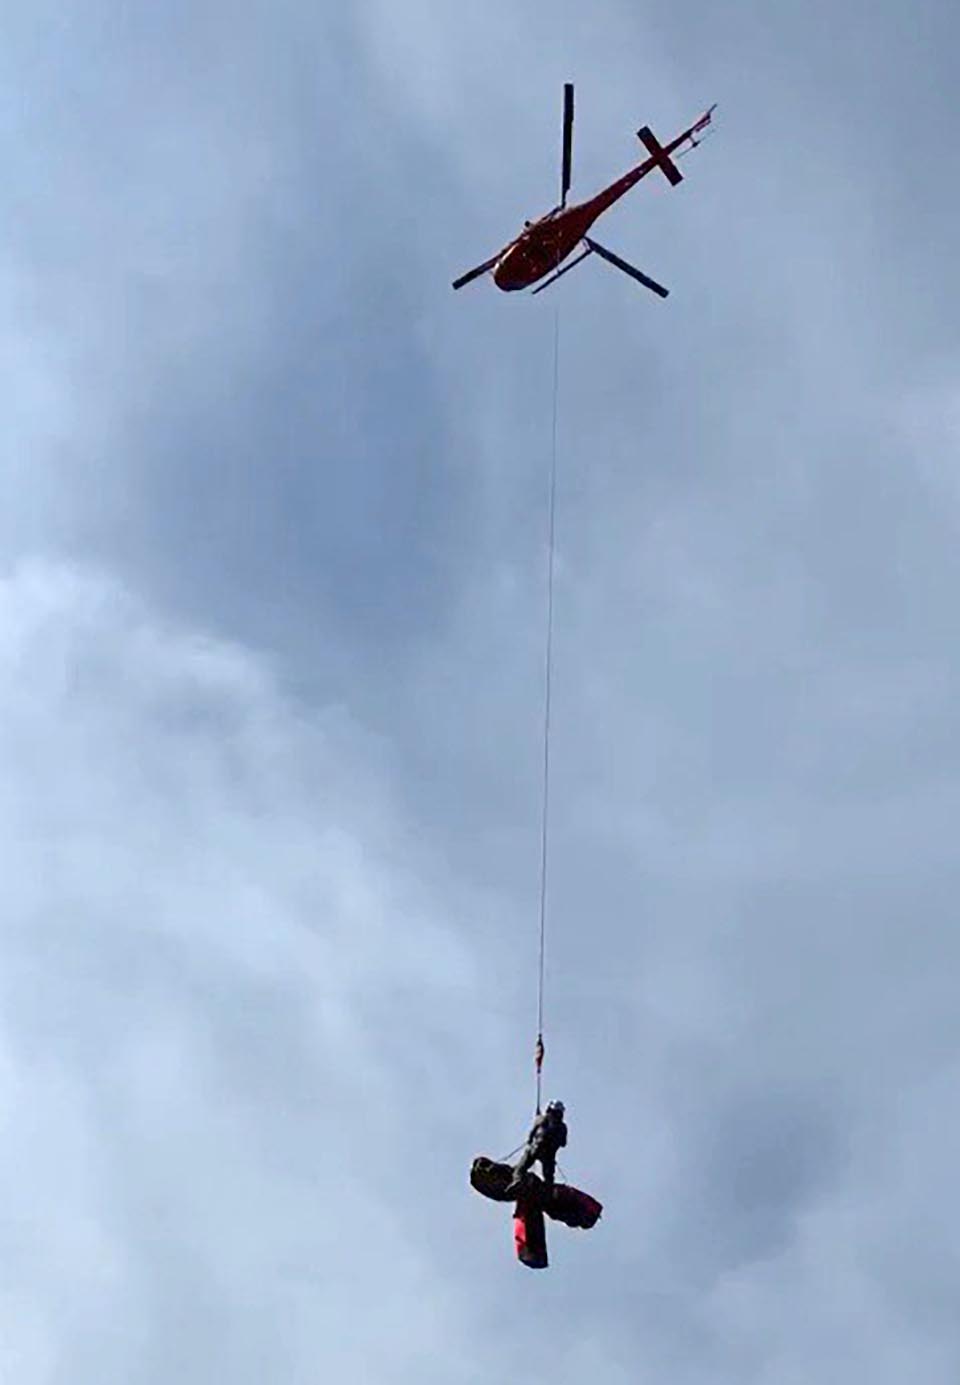 A flying helicopter carries a patient and ranger out of the canyon via a rope.